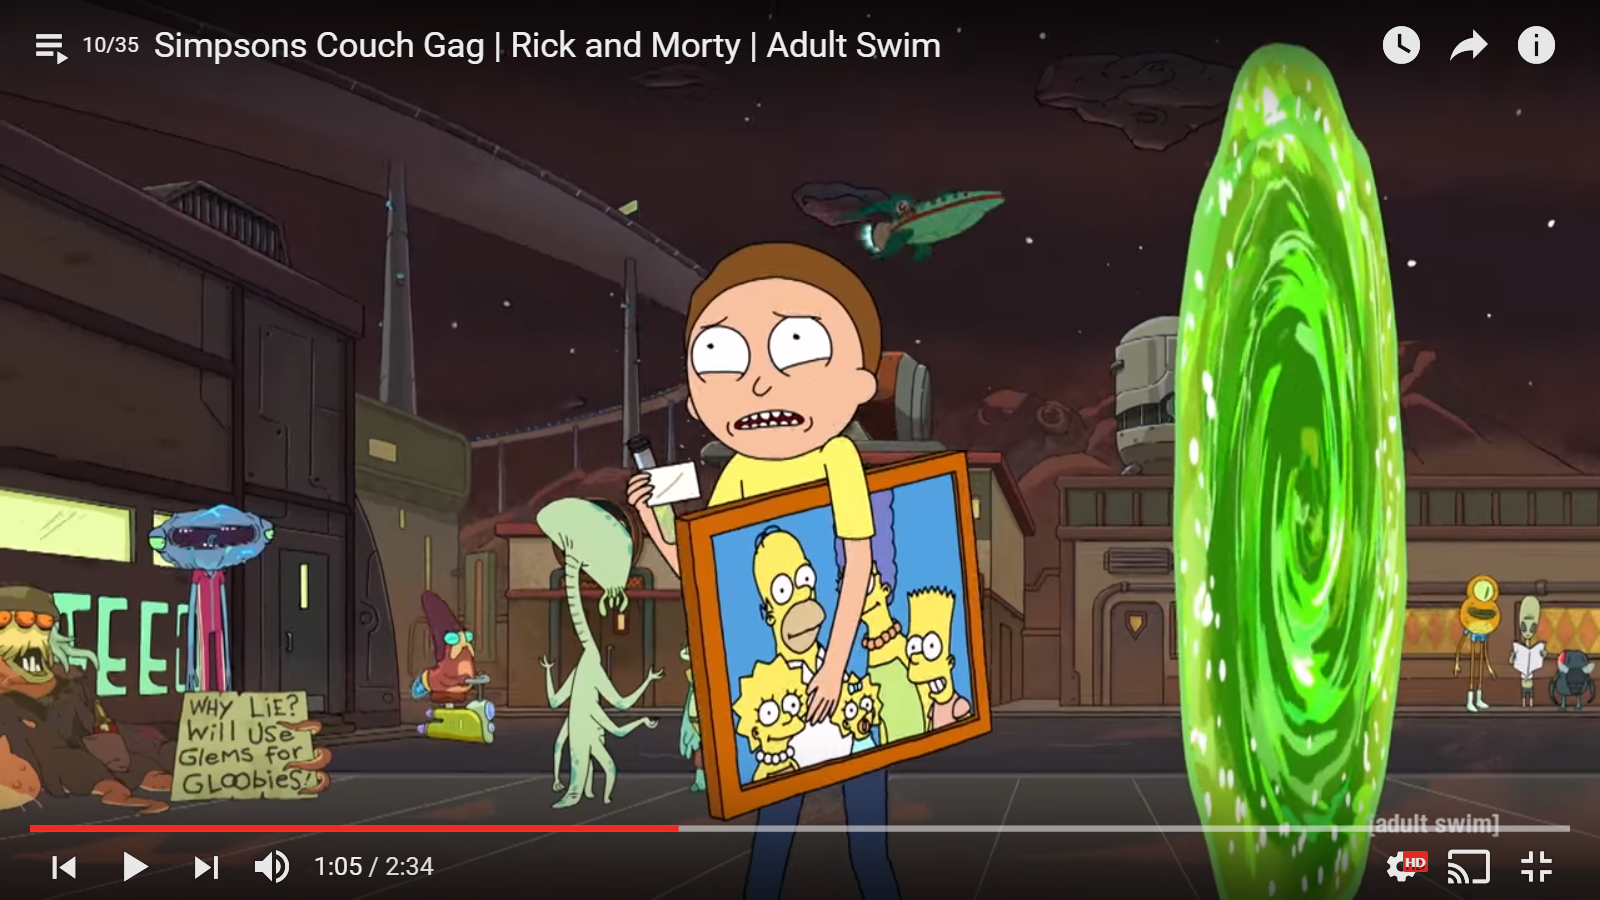 Noticed a familiar delivery service in the Rick and Morty/Simpsons crossover episode.